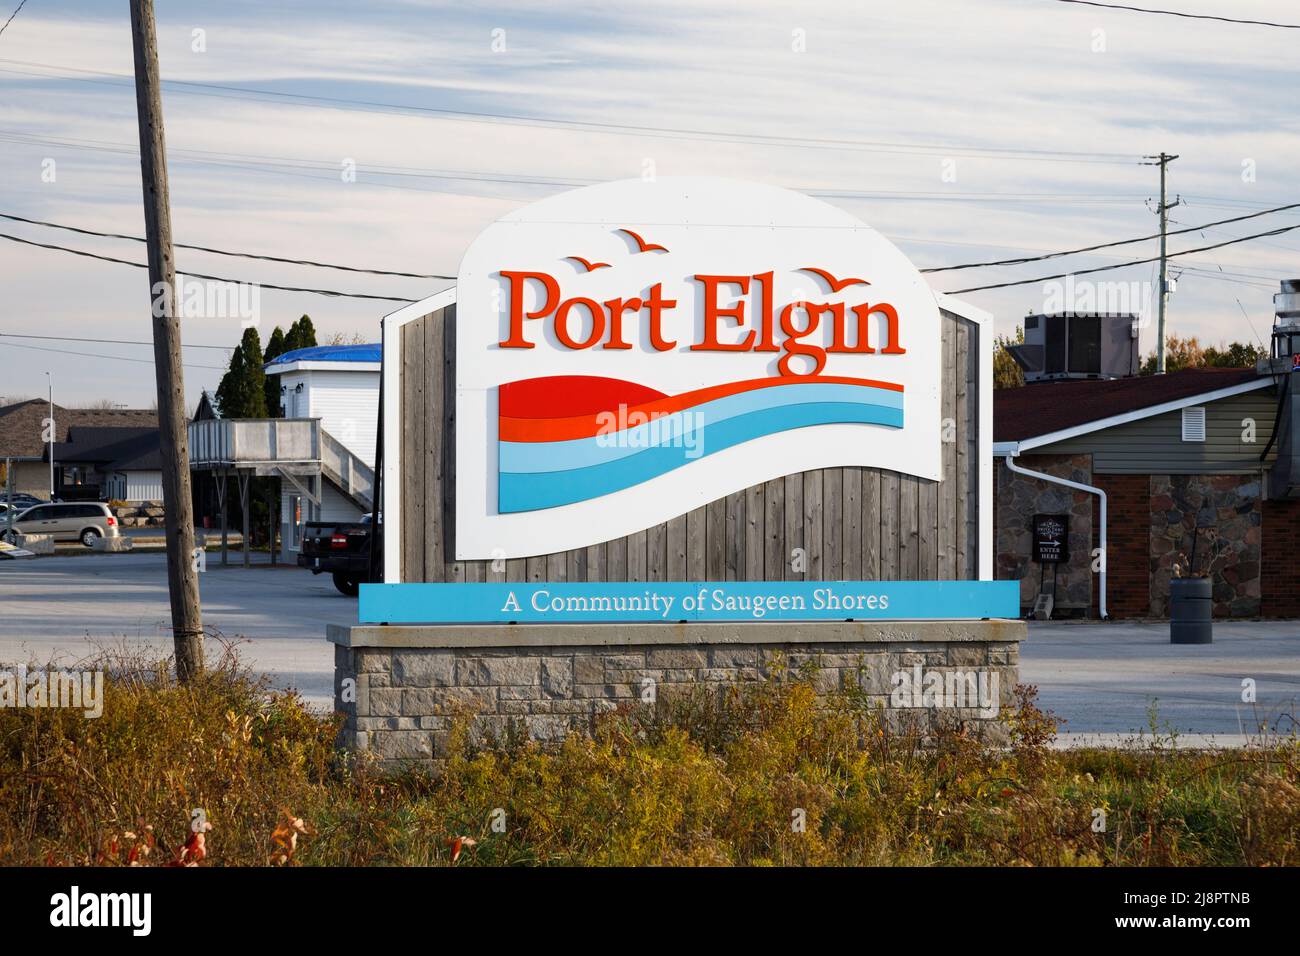 The gateway sign for the Community of Port Elgin in Saugeen Shores, Bruce County, Ontario, Canada. Stock Photo